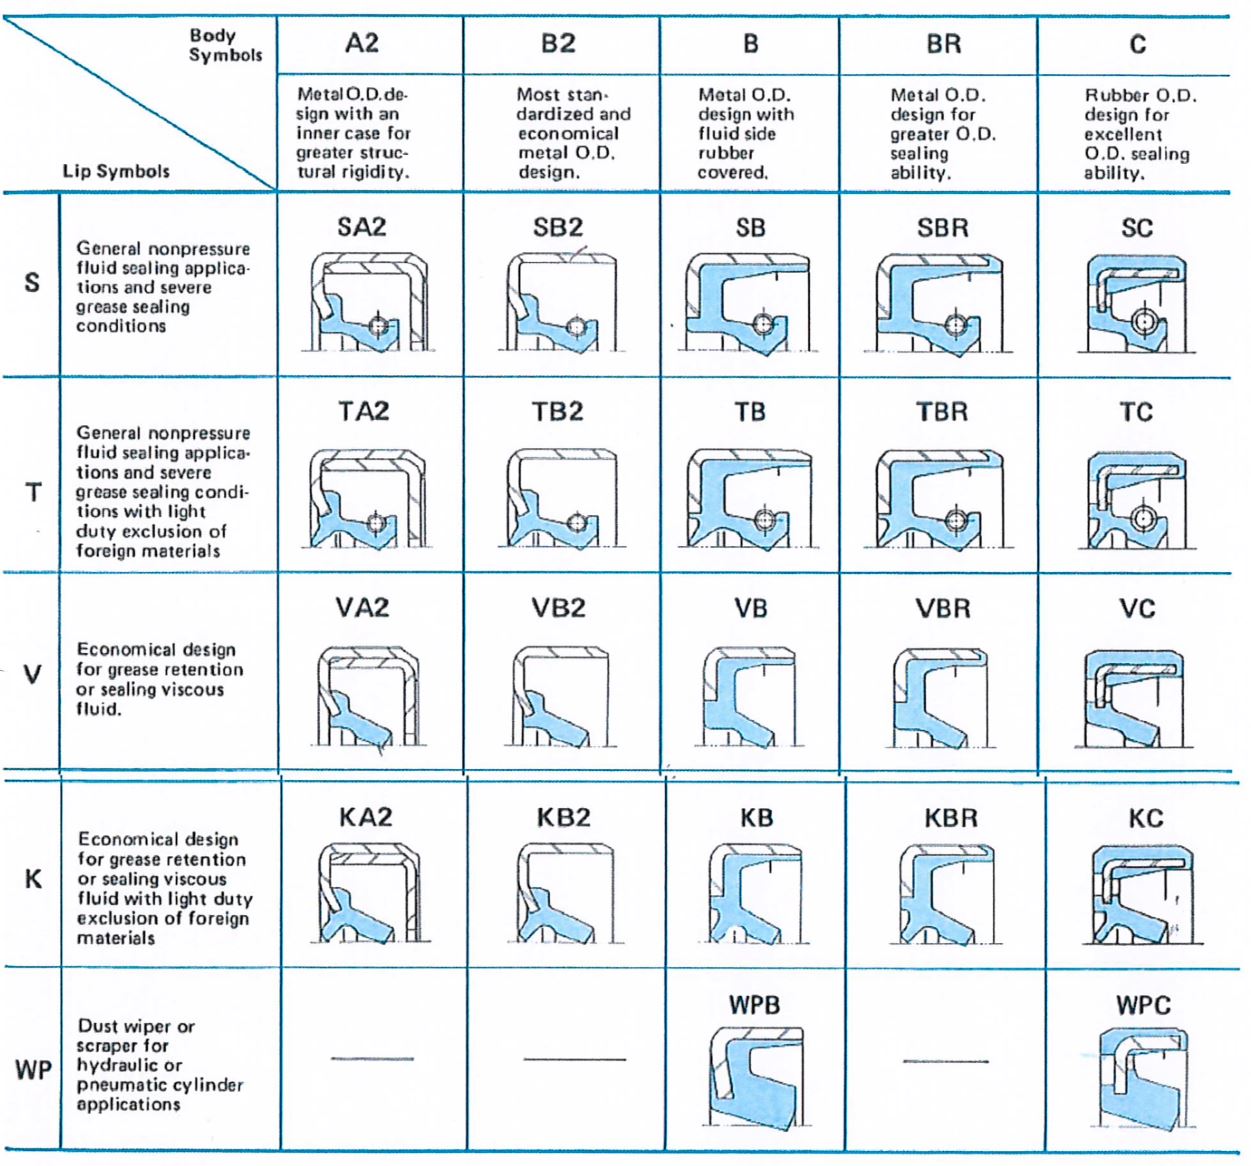 table showing 22 standard oil seal designs commonly used for a variety of applications